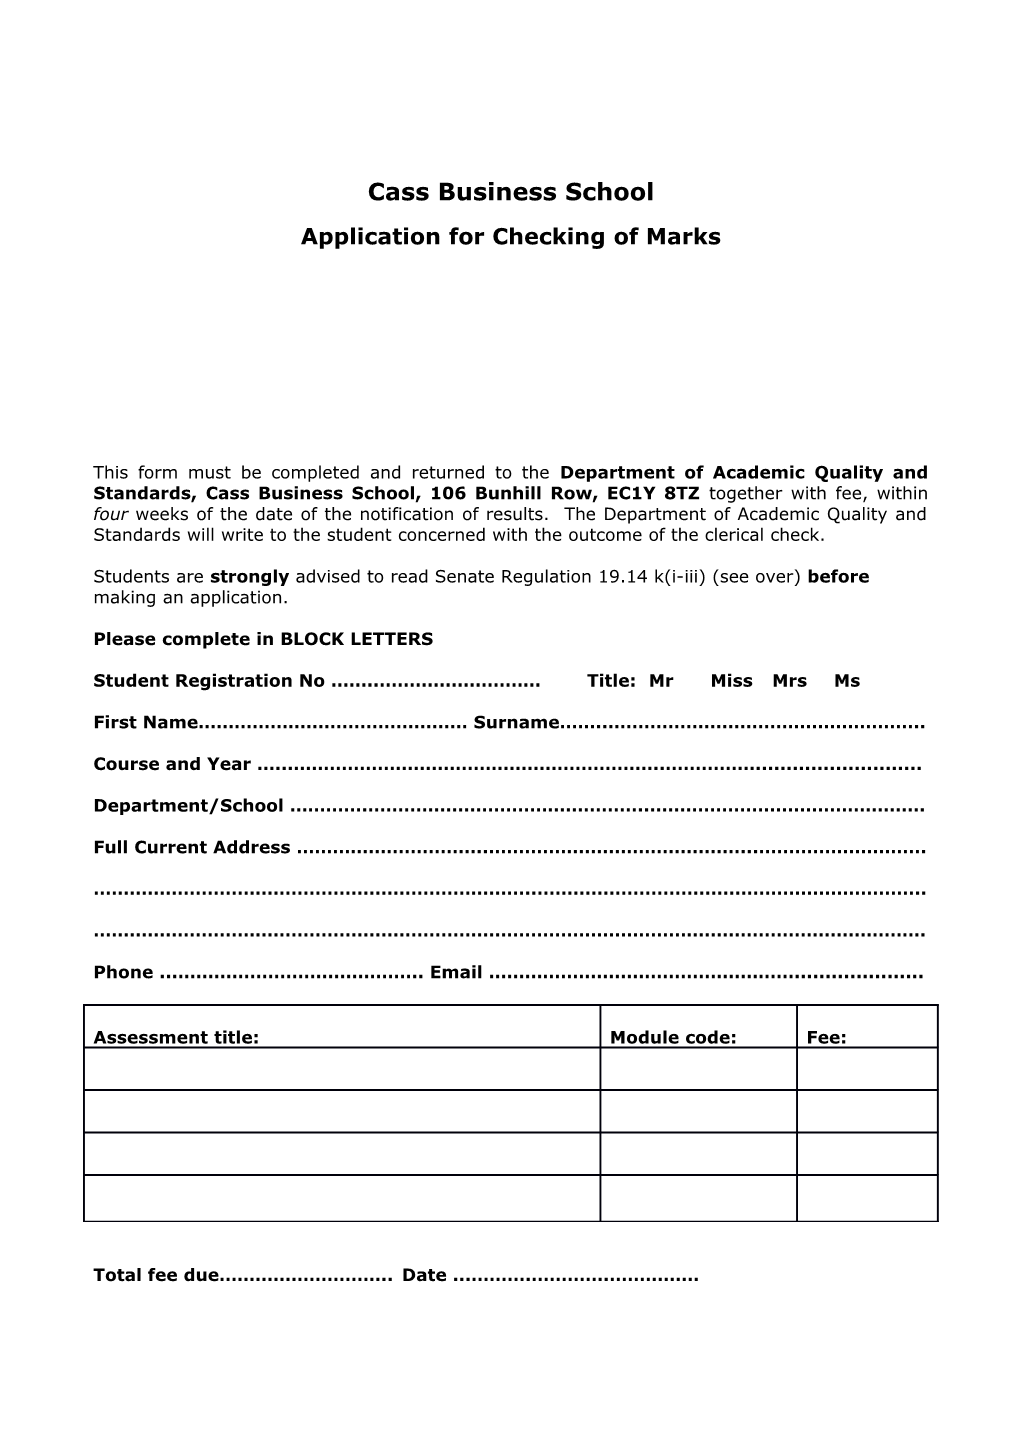 Application for Checking of Marks